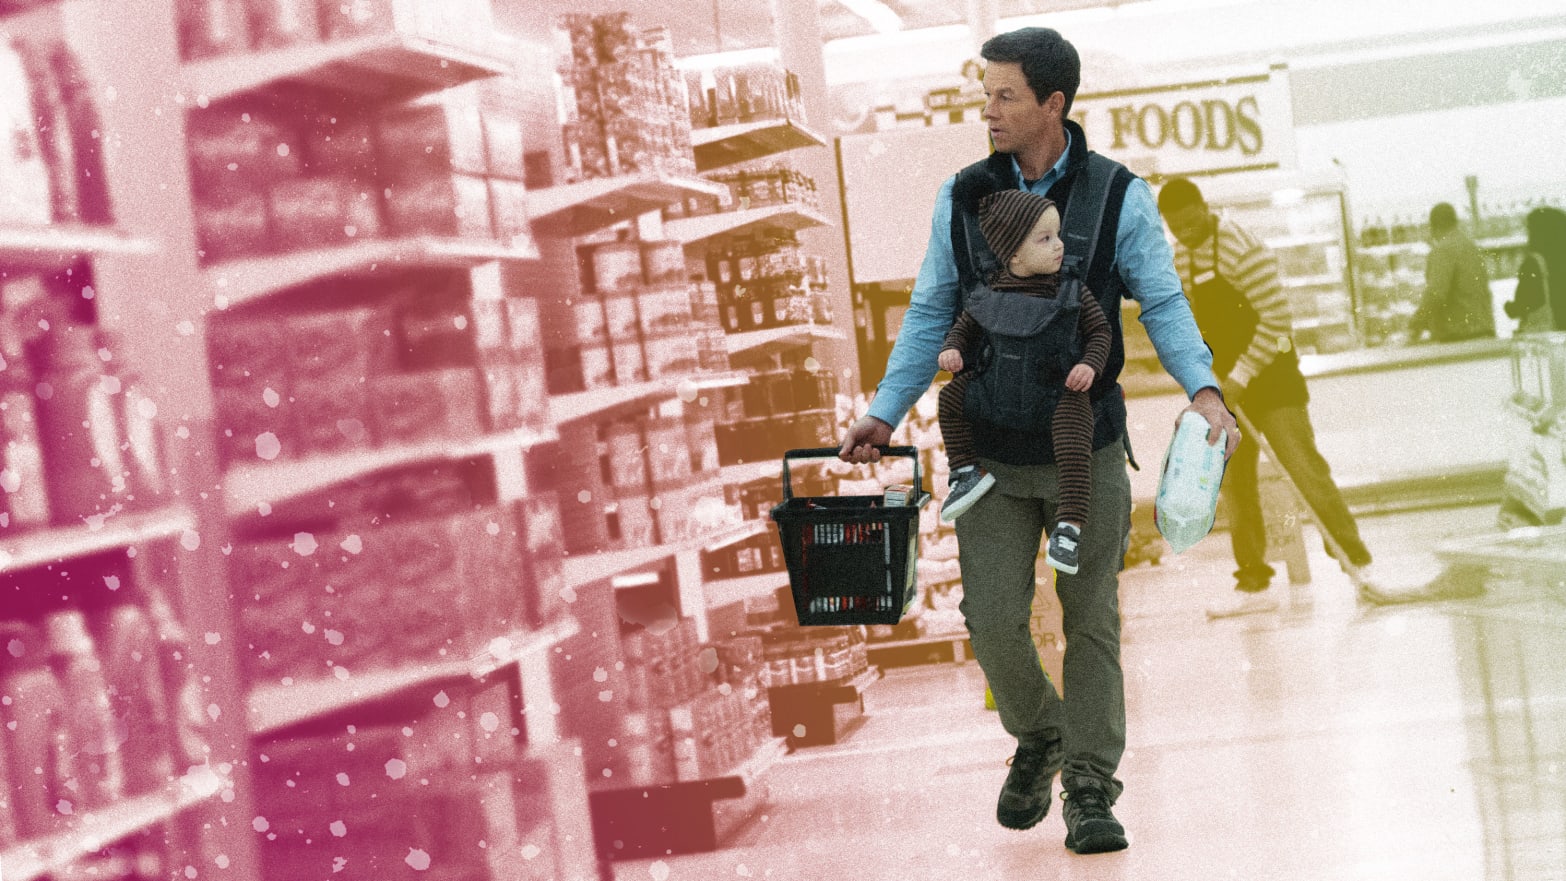 A photo illustration showing a still from The Family Plan starrring Mark Wahlberg.